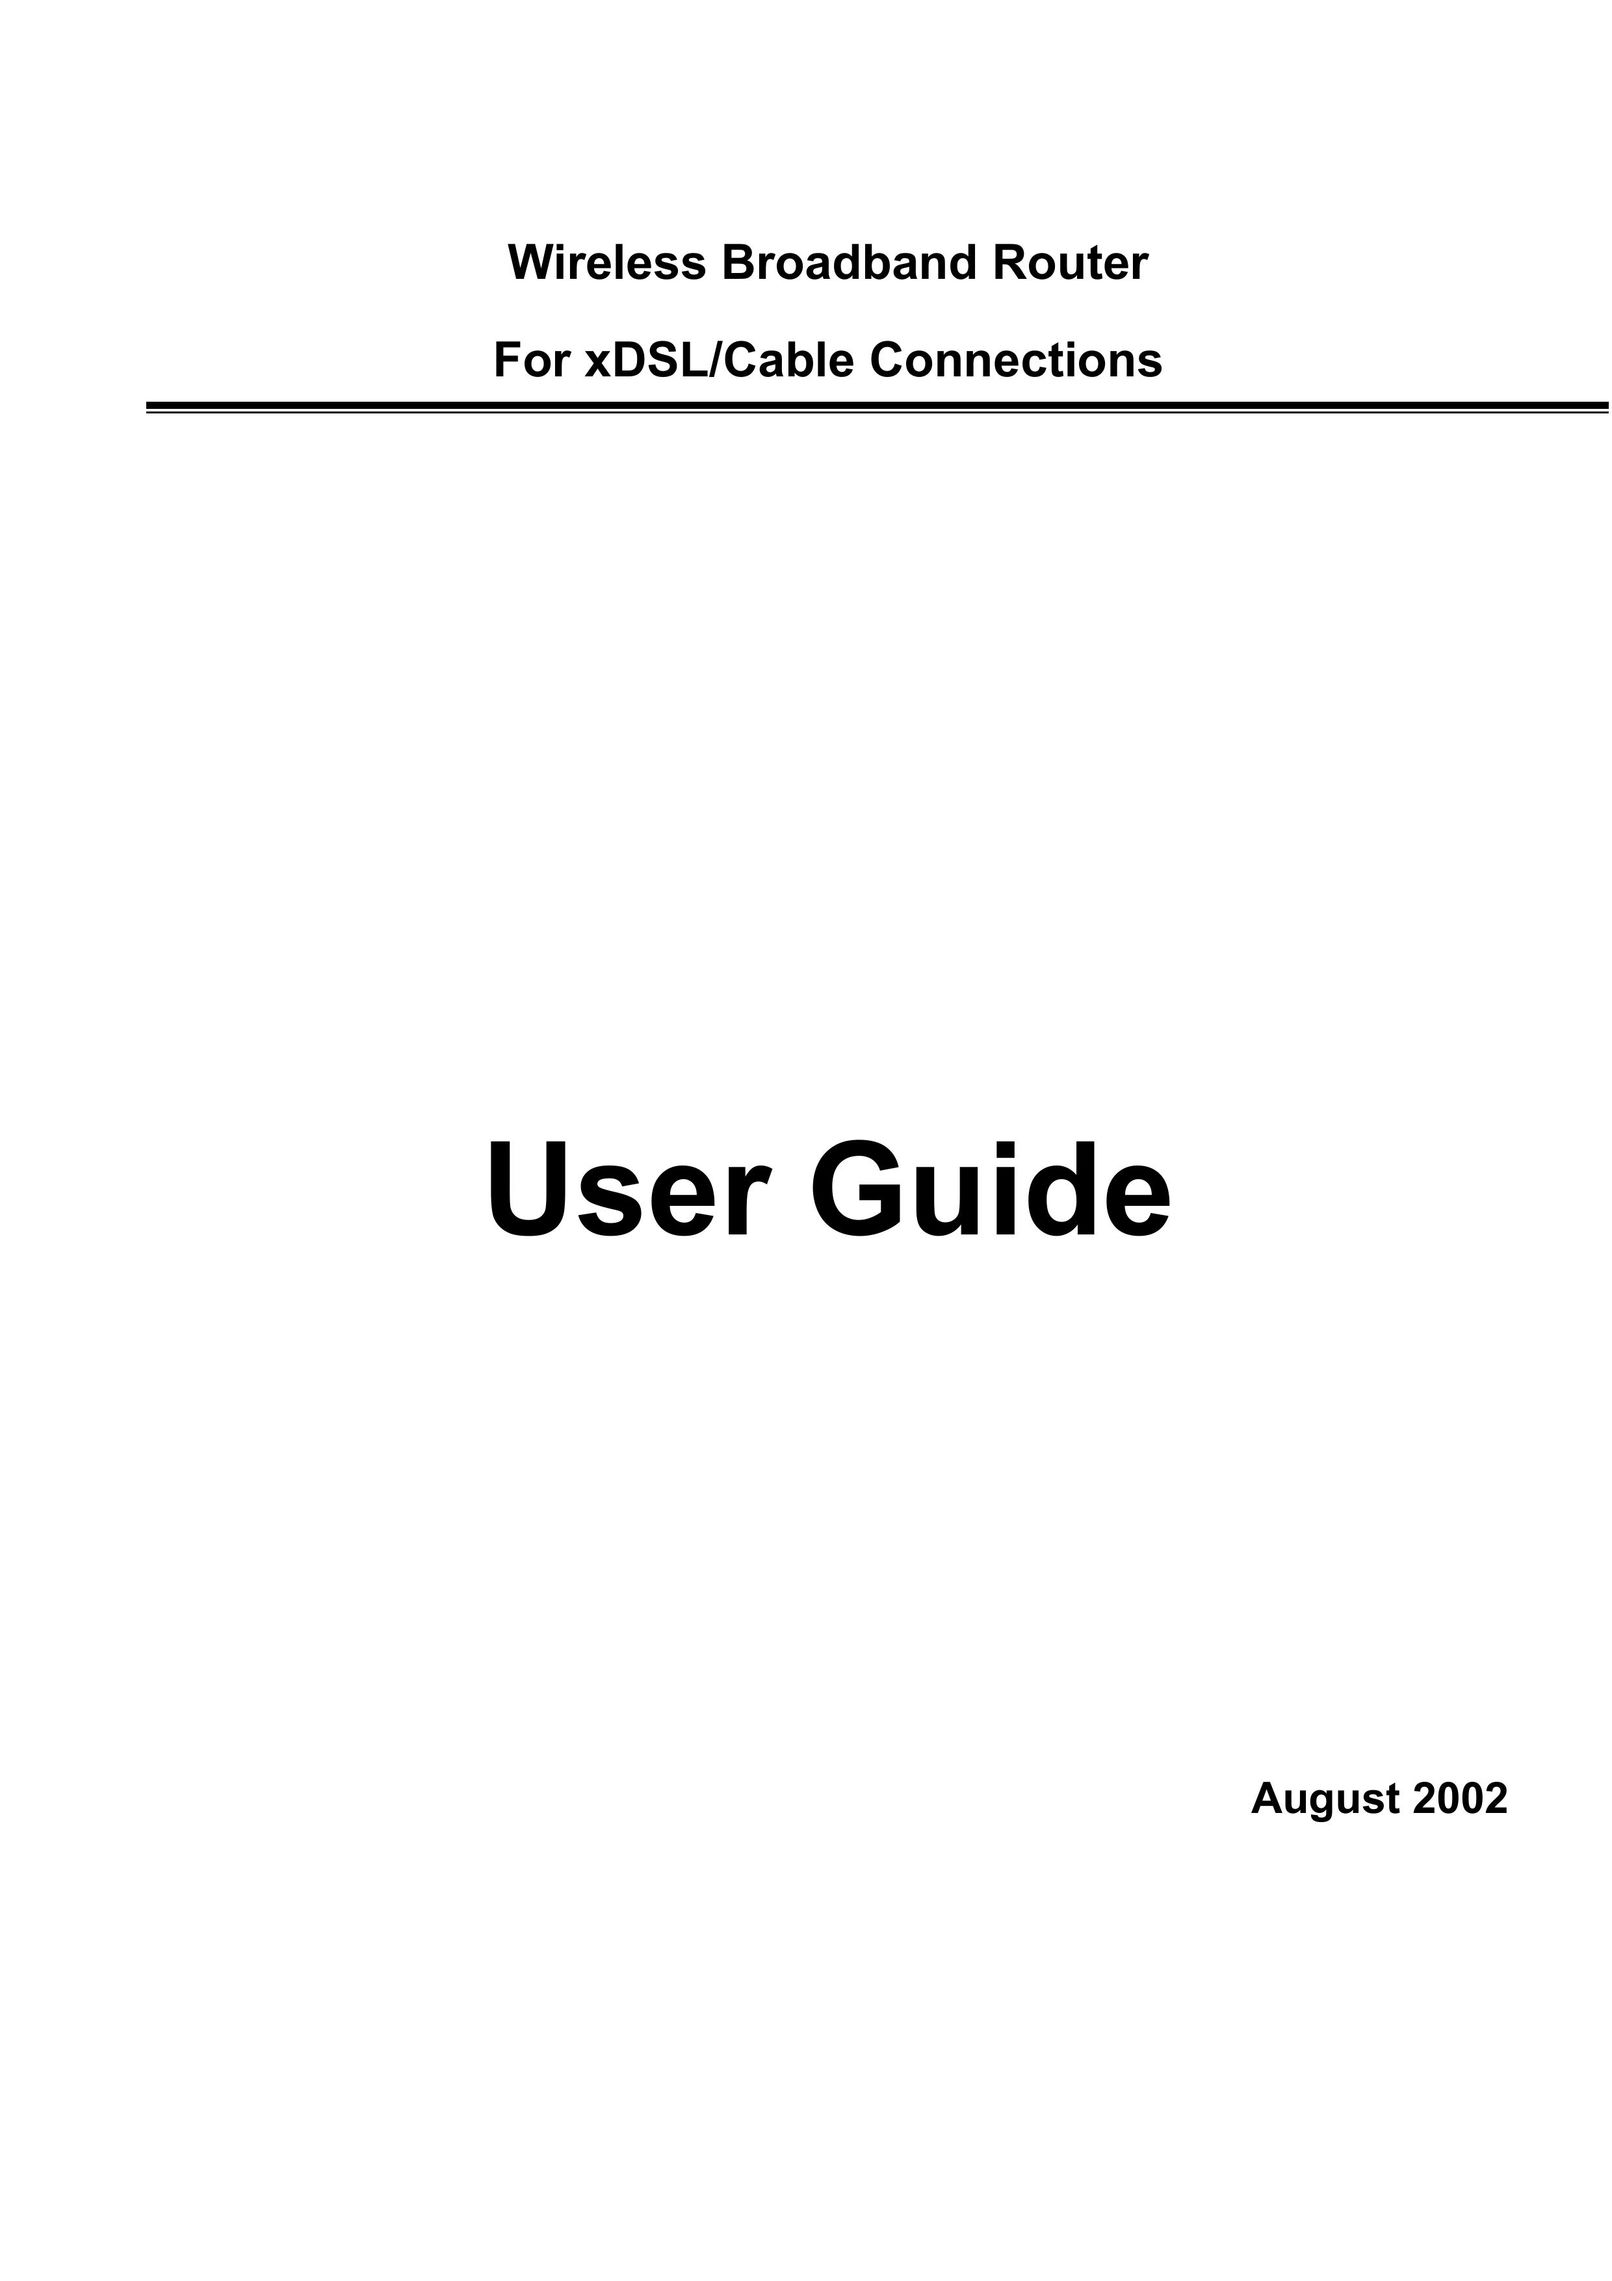 Broadband Products xDSL/Cable Network Router User Manual